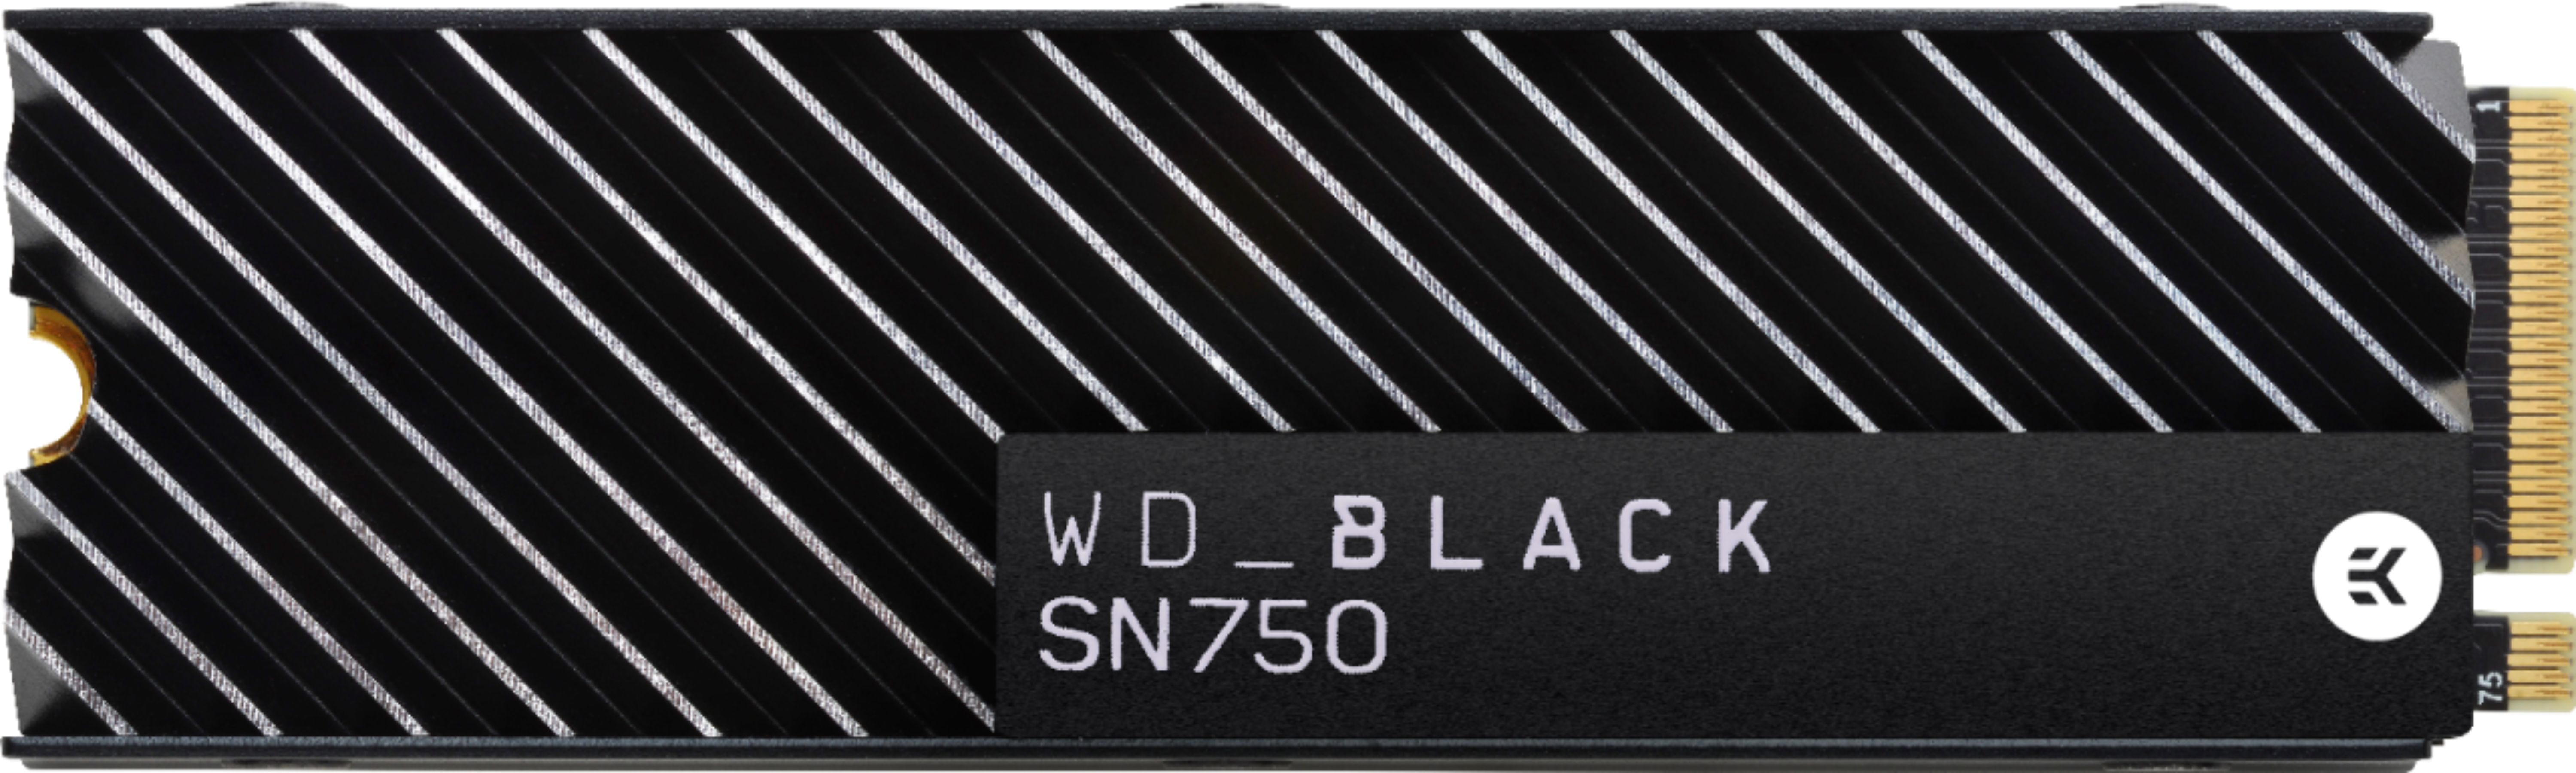 WD BLACK NVMe Gaming 500GB Gen 3 x4 Internal Solid State Drive with Heatsink for Desktops WDBGMP5000ANC-WRSN